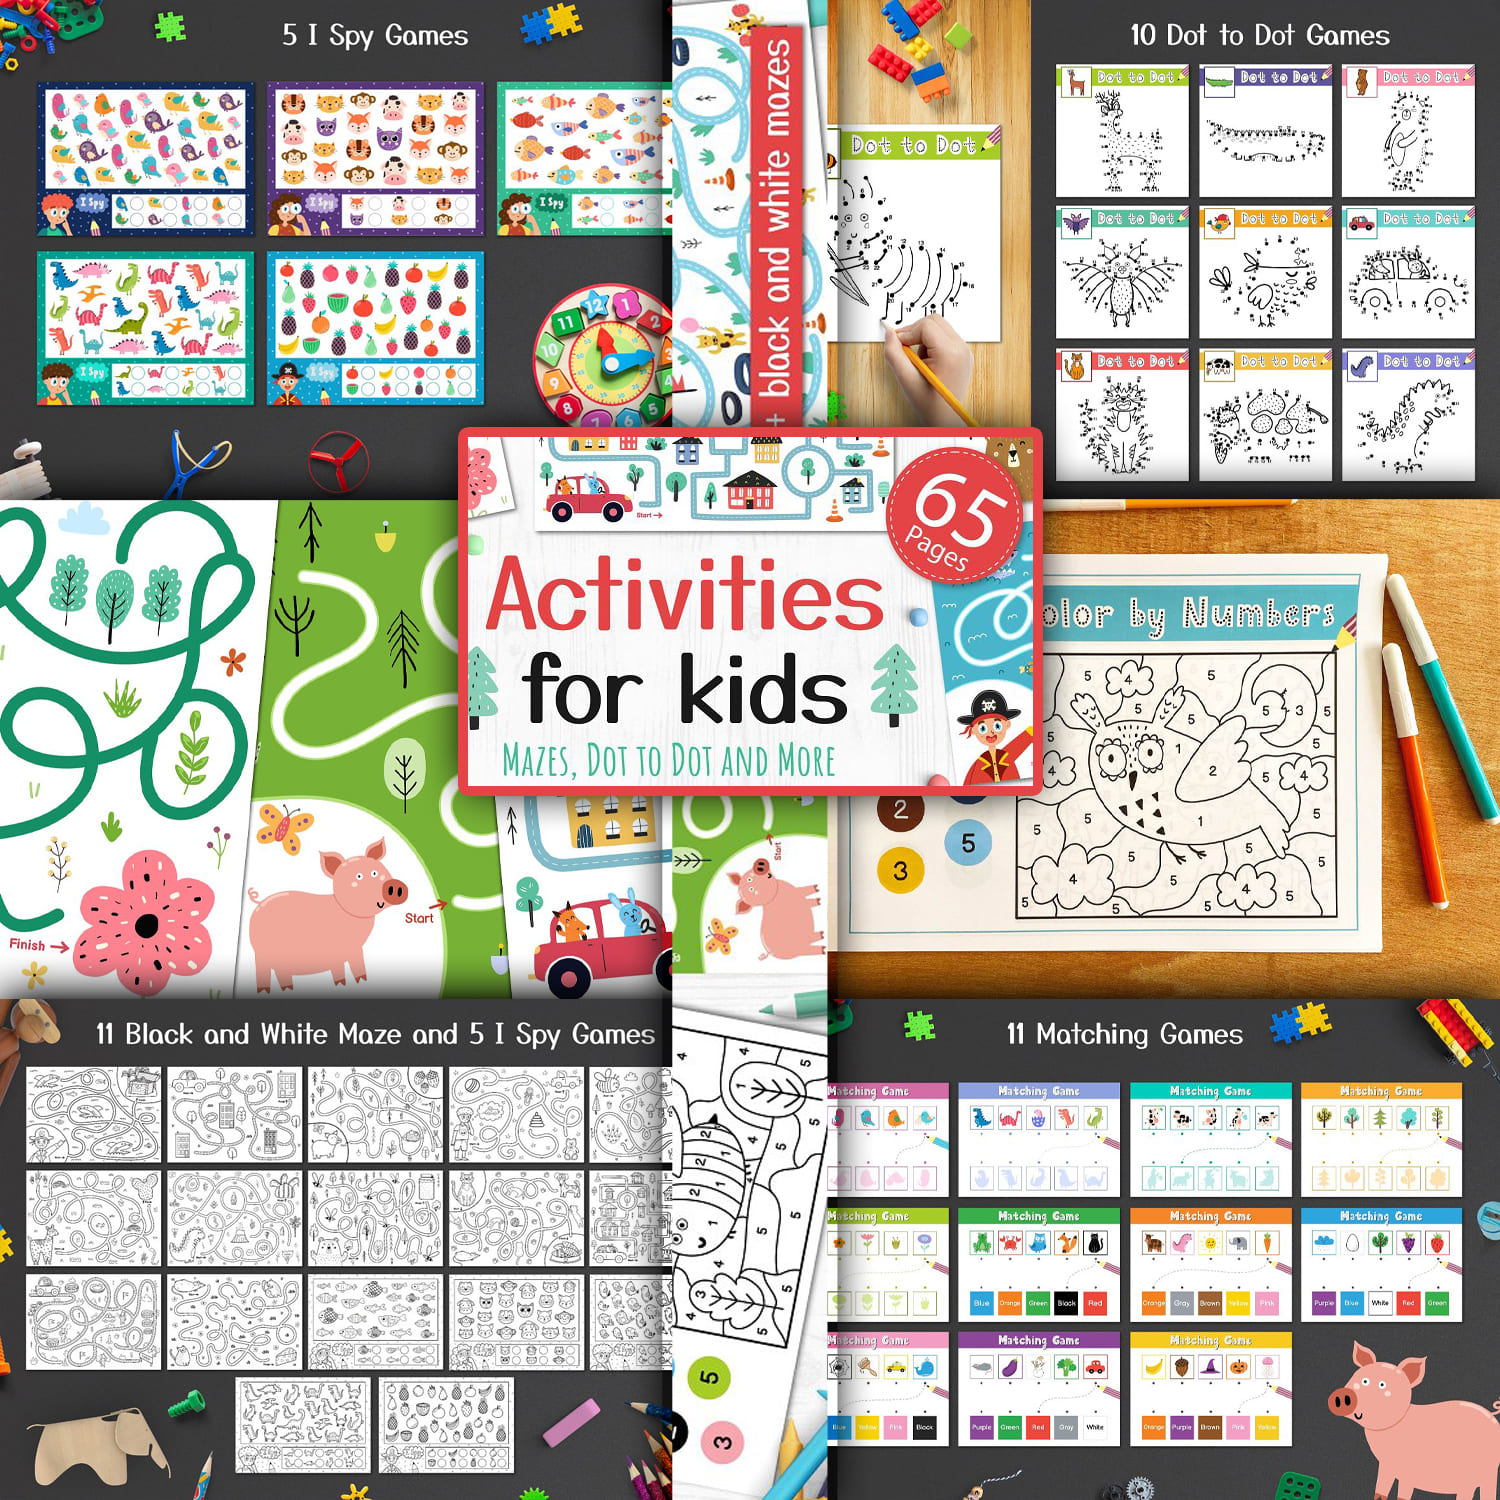 All slides of activities for kids.